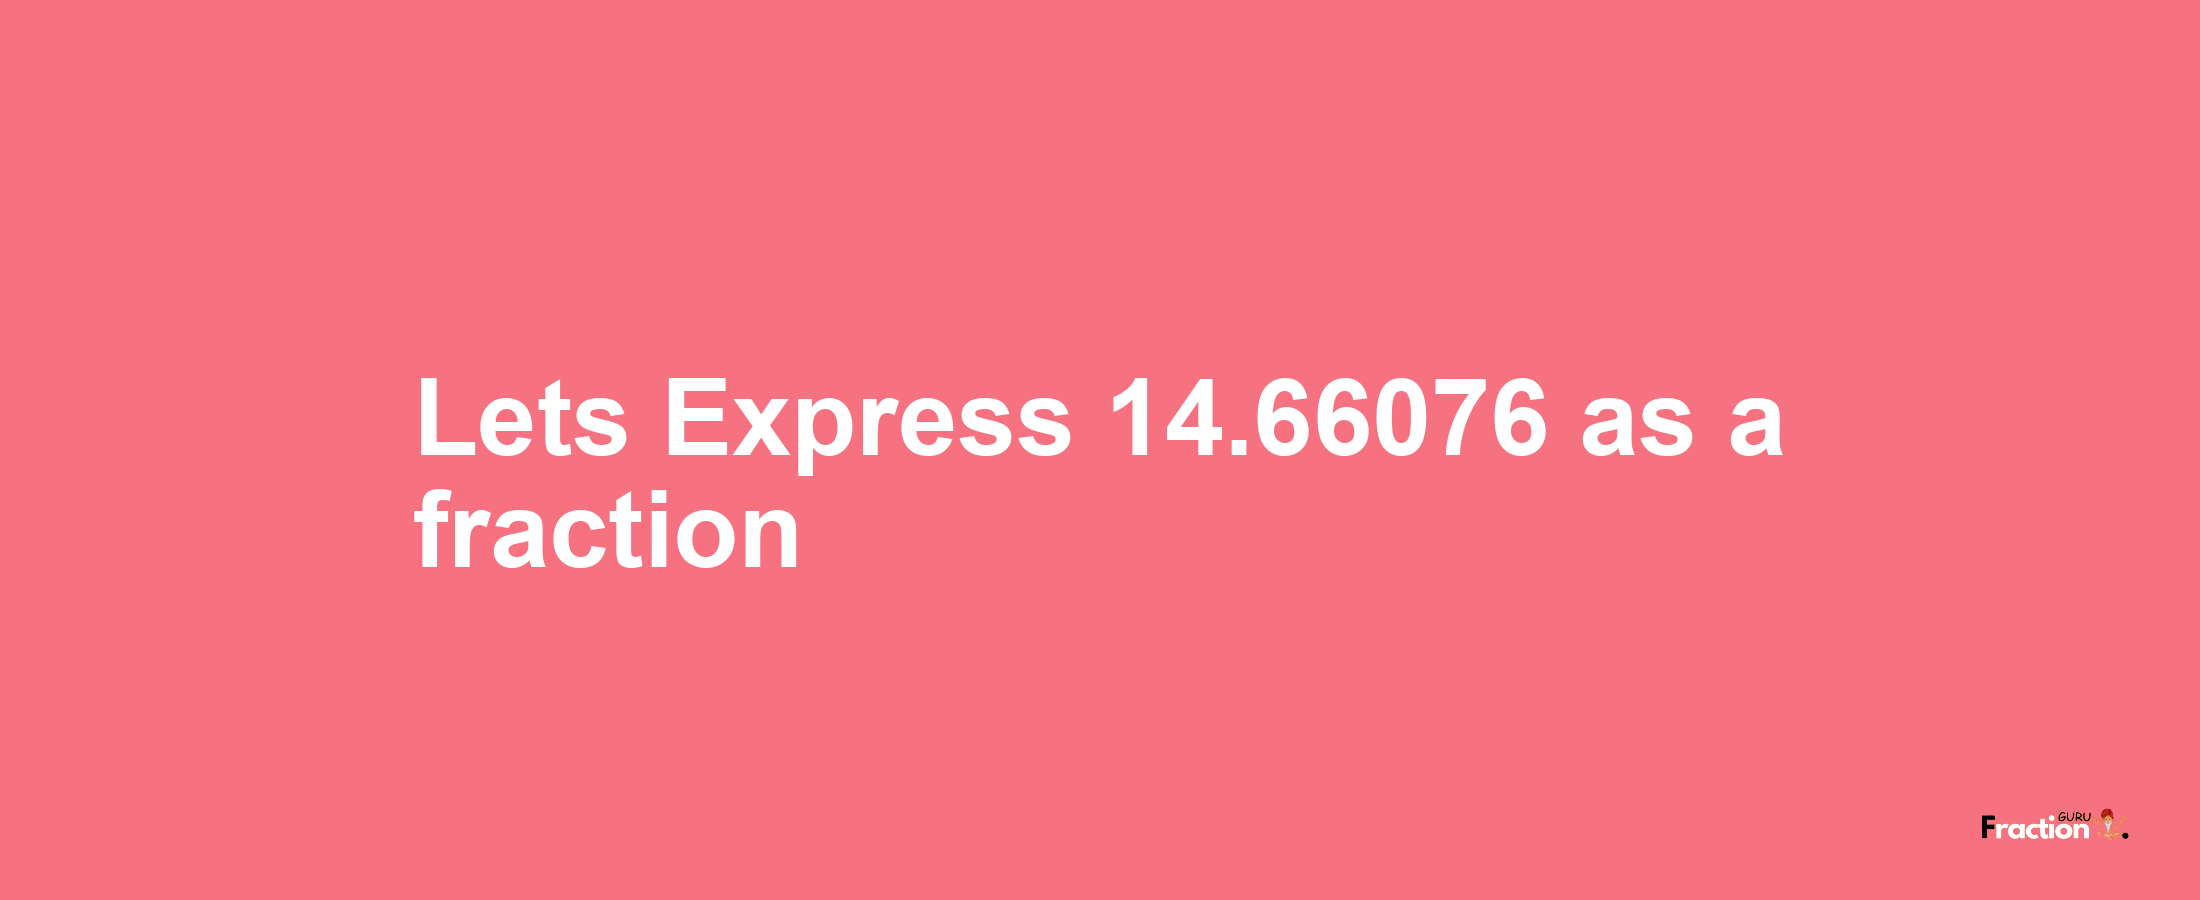 Lets Express 14.66076 as afraction